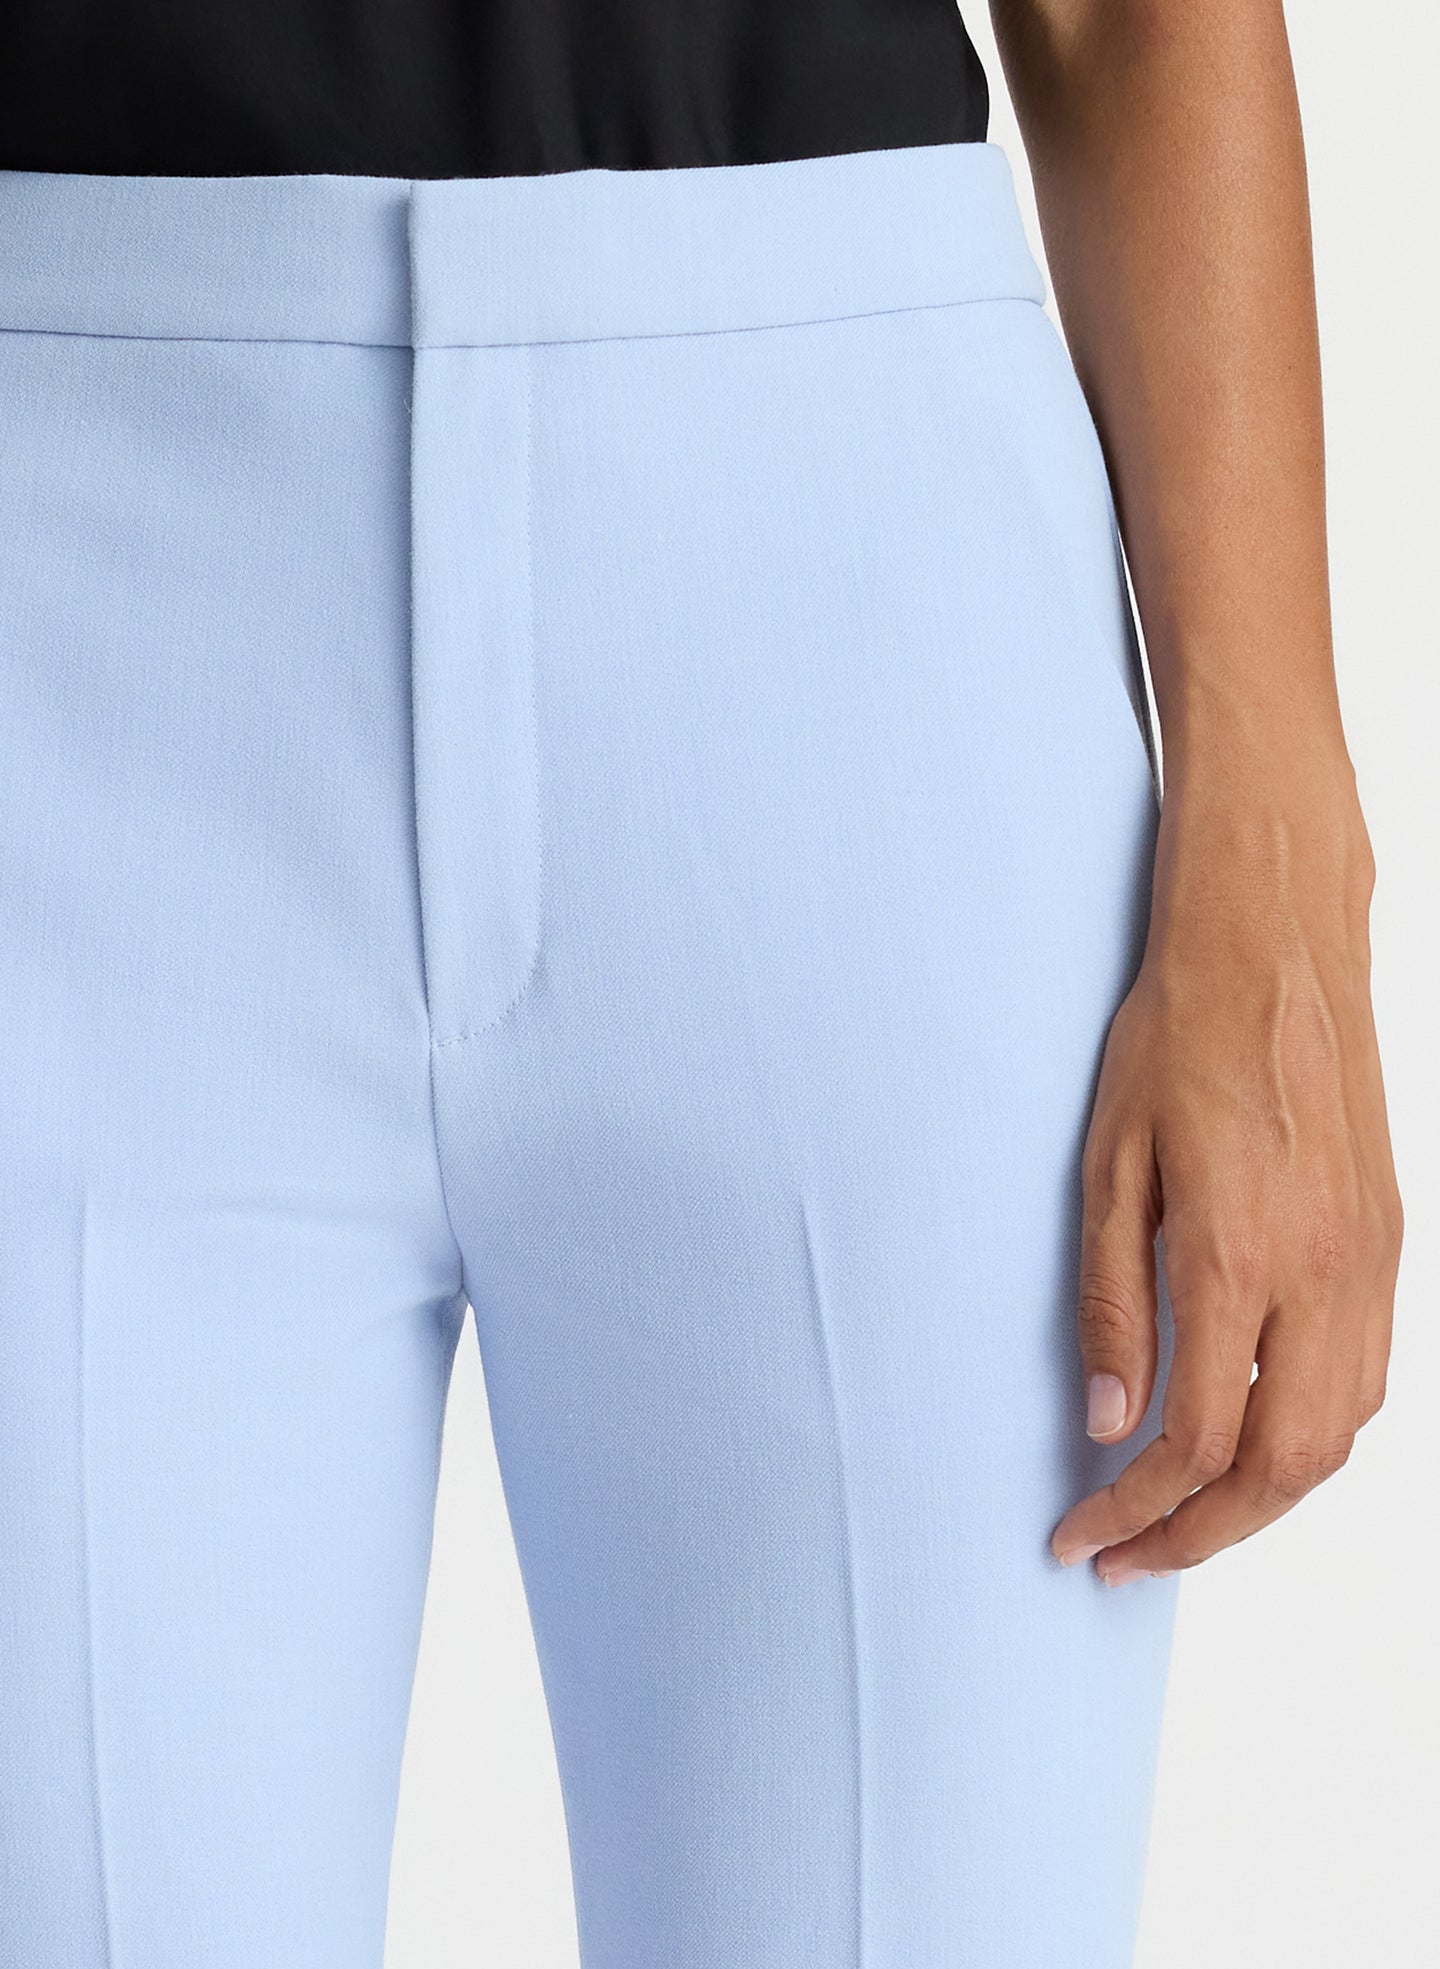 detail view of woman wearing black satin camisole with light blue pants